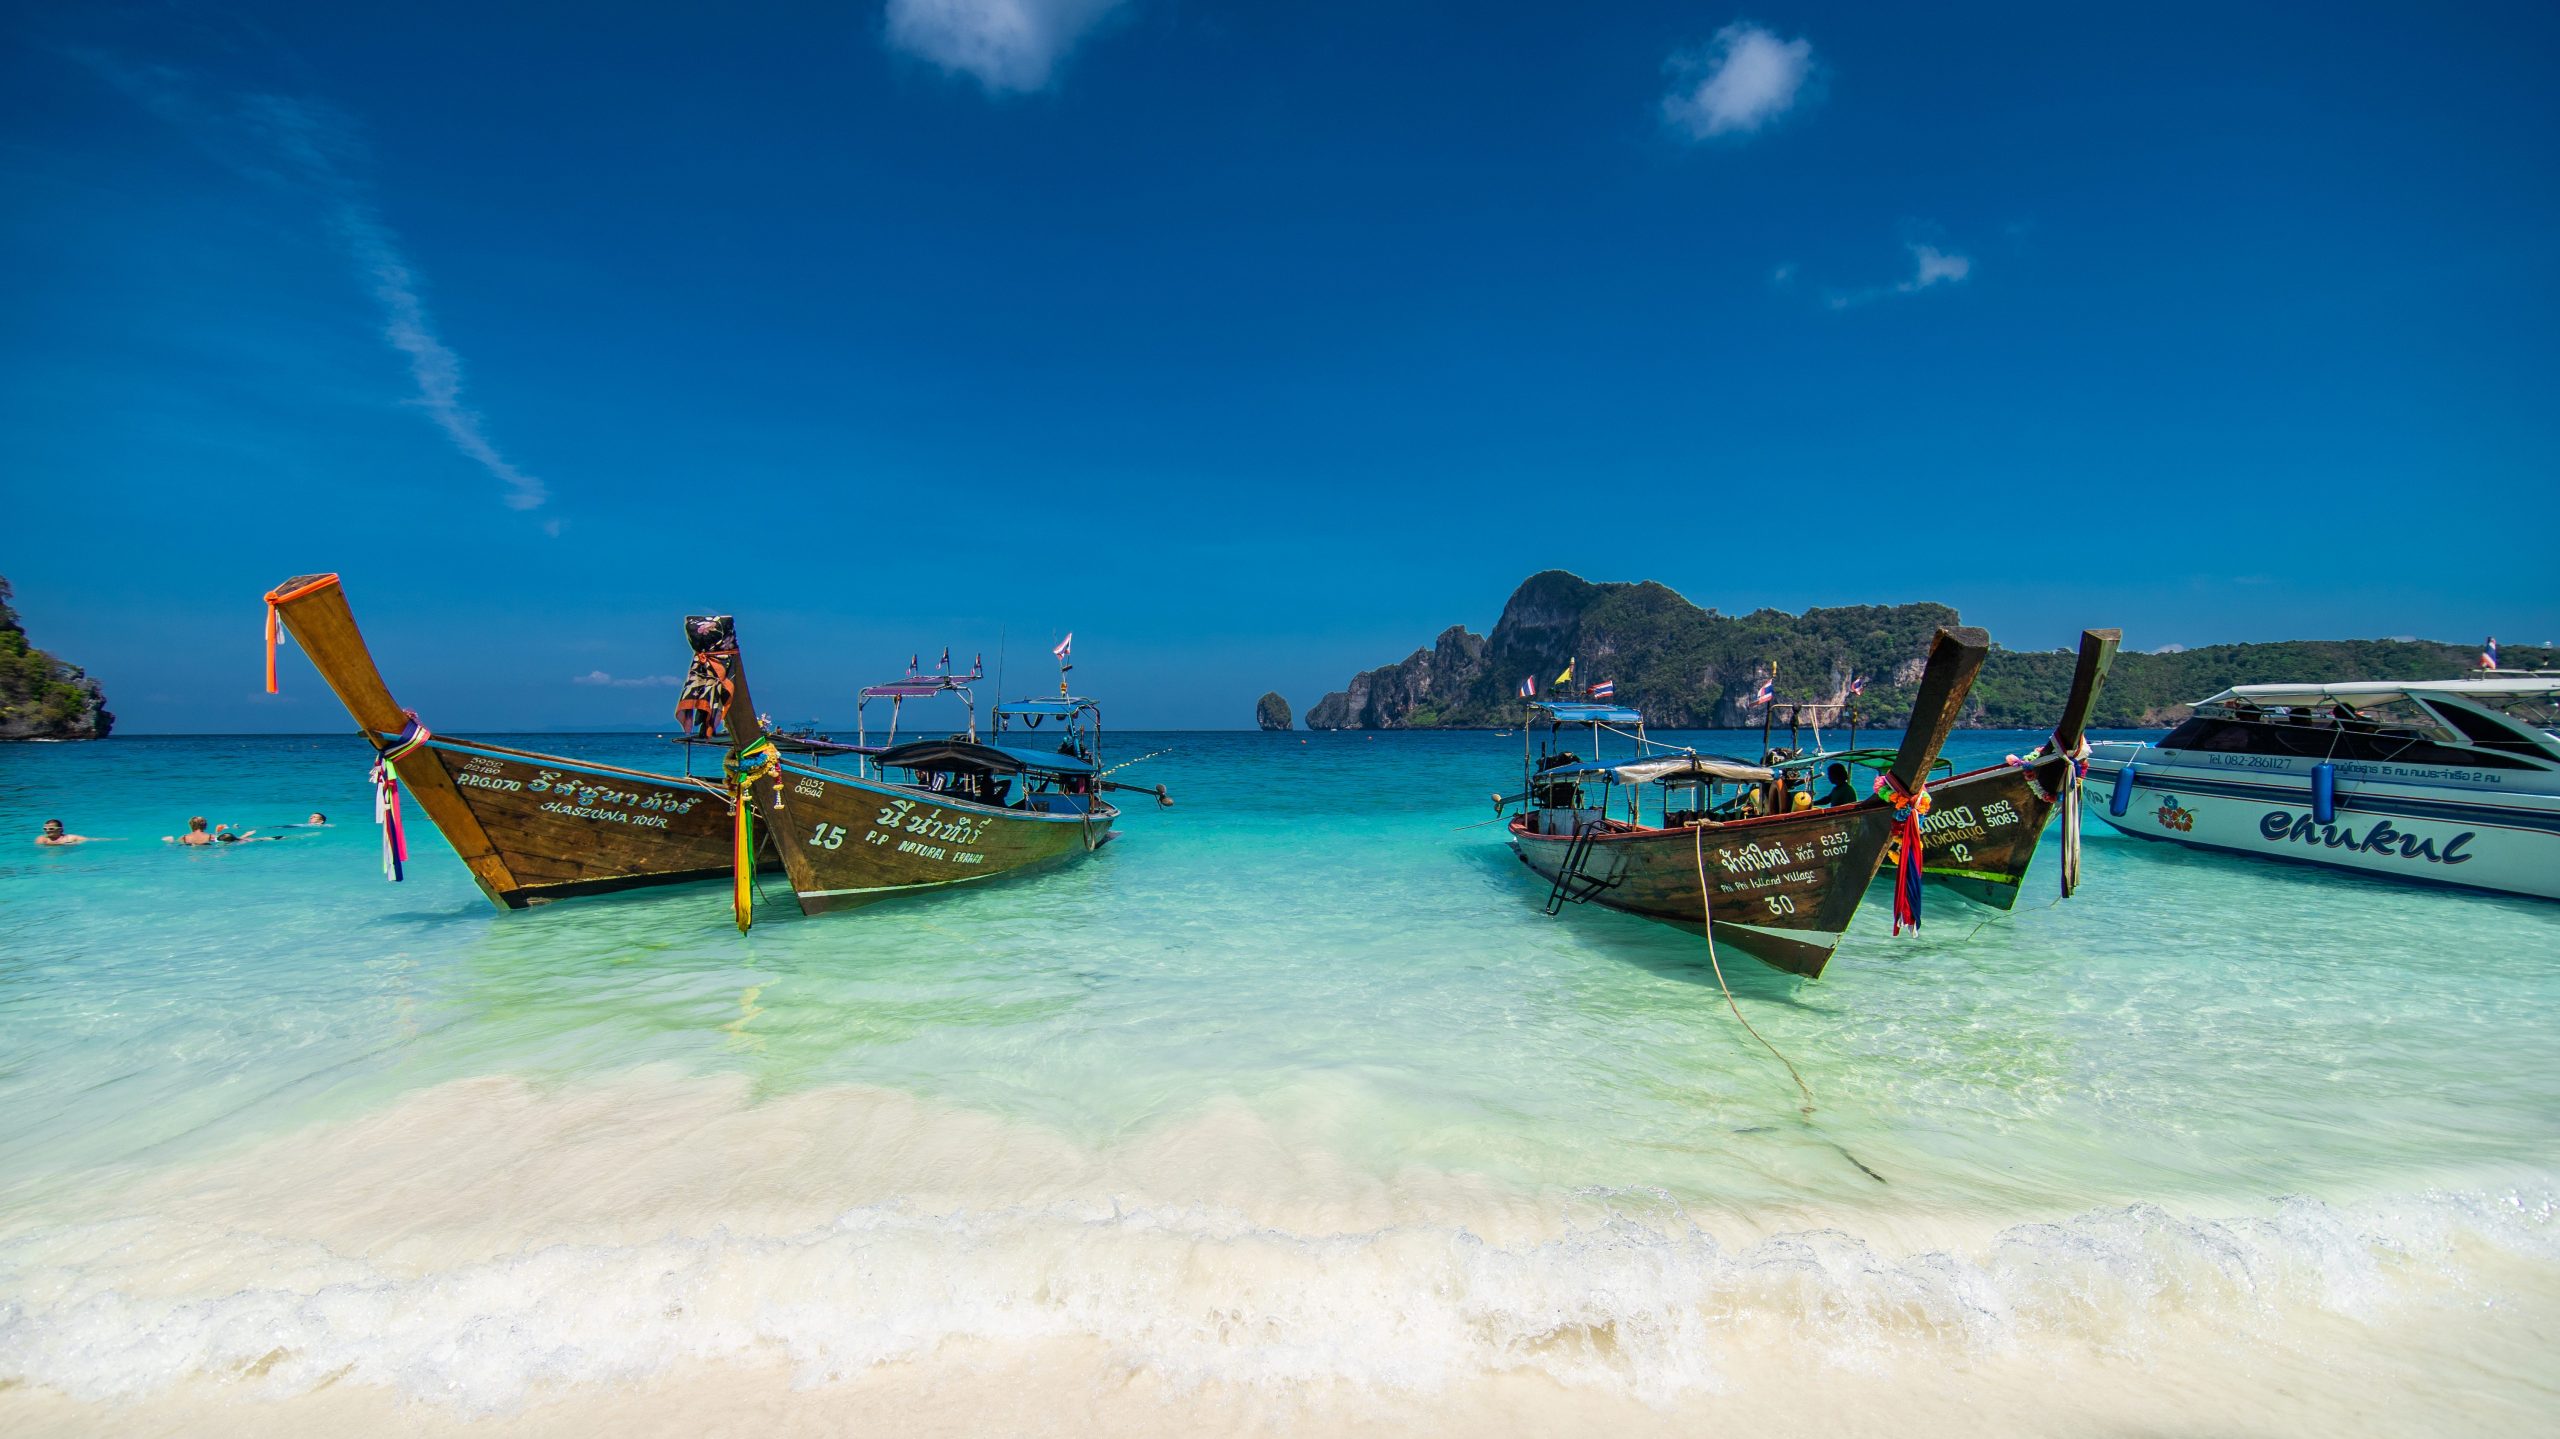 Where to stay - PhiPhi island hotels 